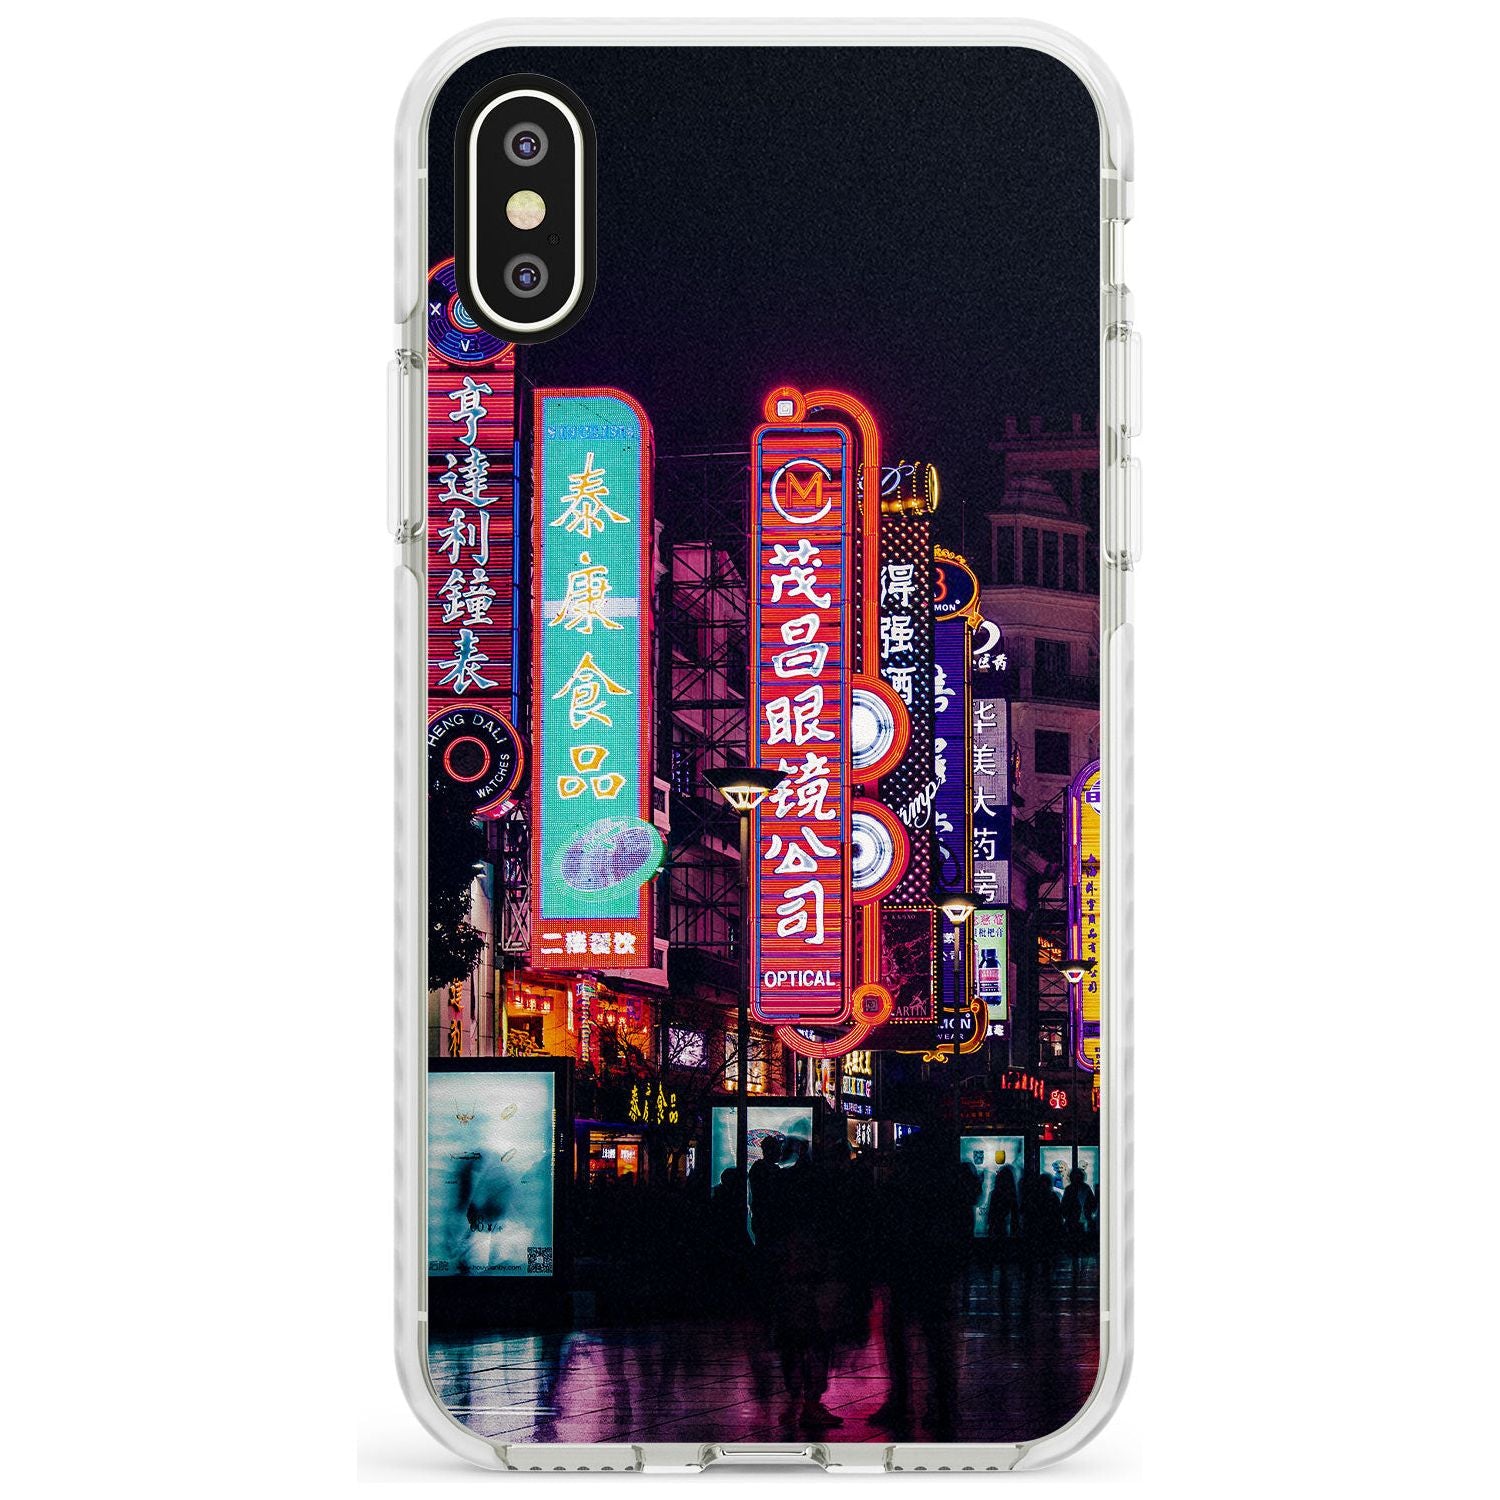 Busy Street - Neon Cities Photographs Impact Phone Case for iPhone X XS Max XR